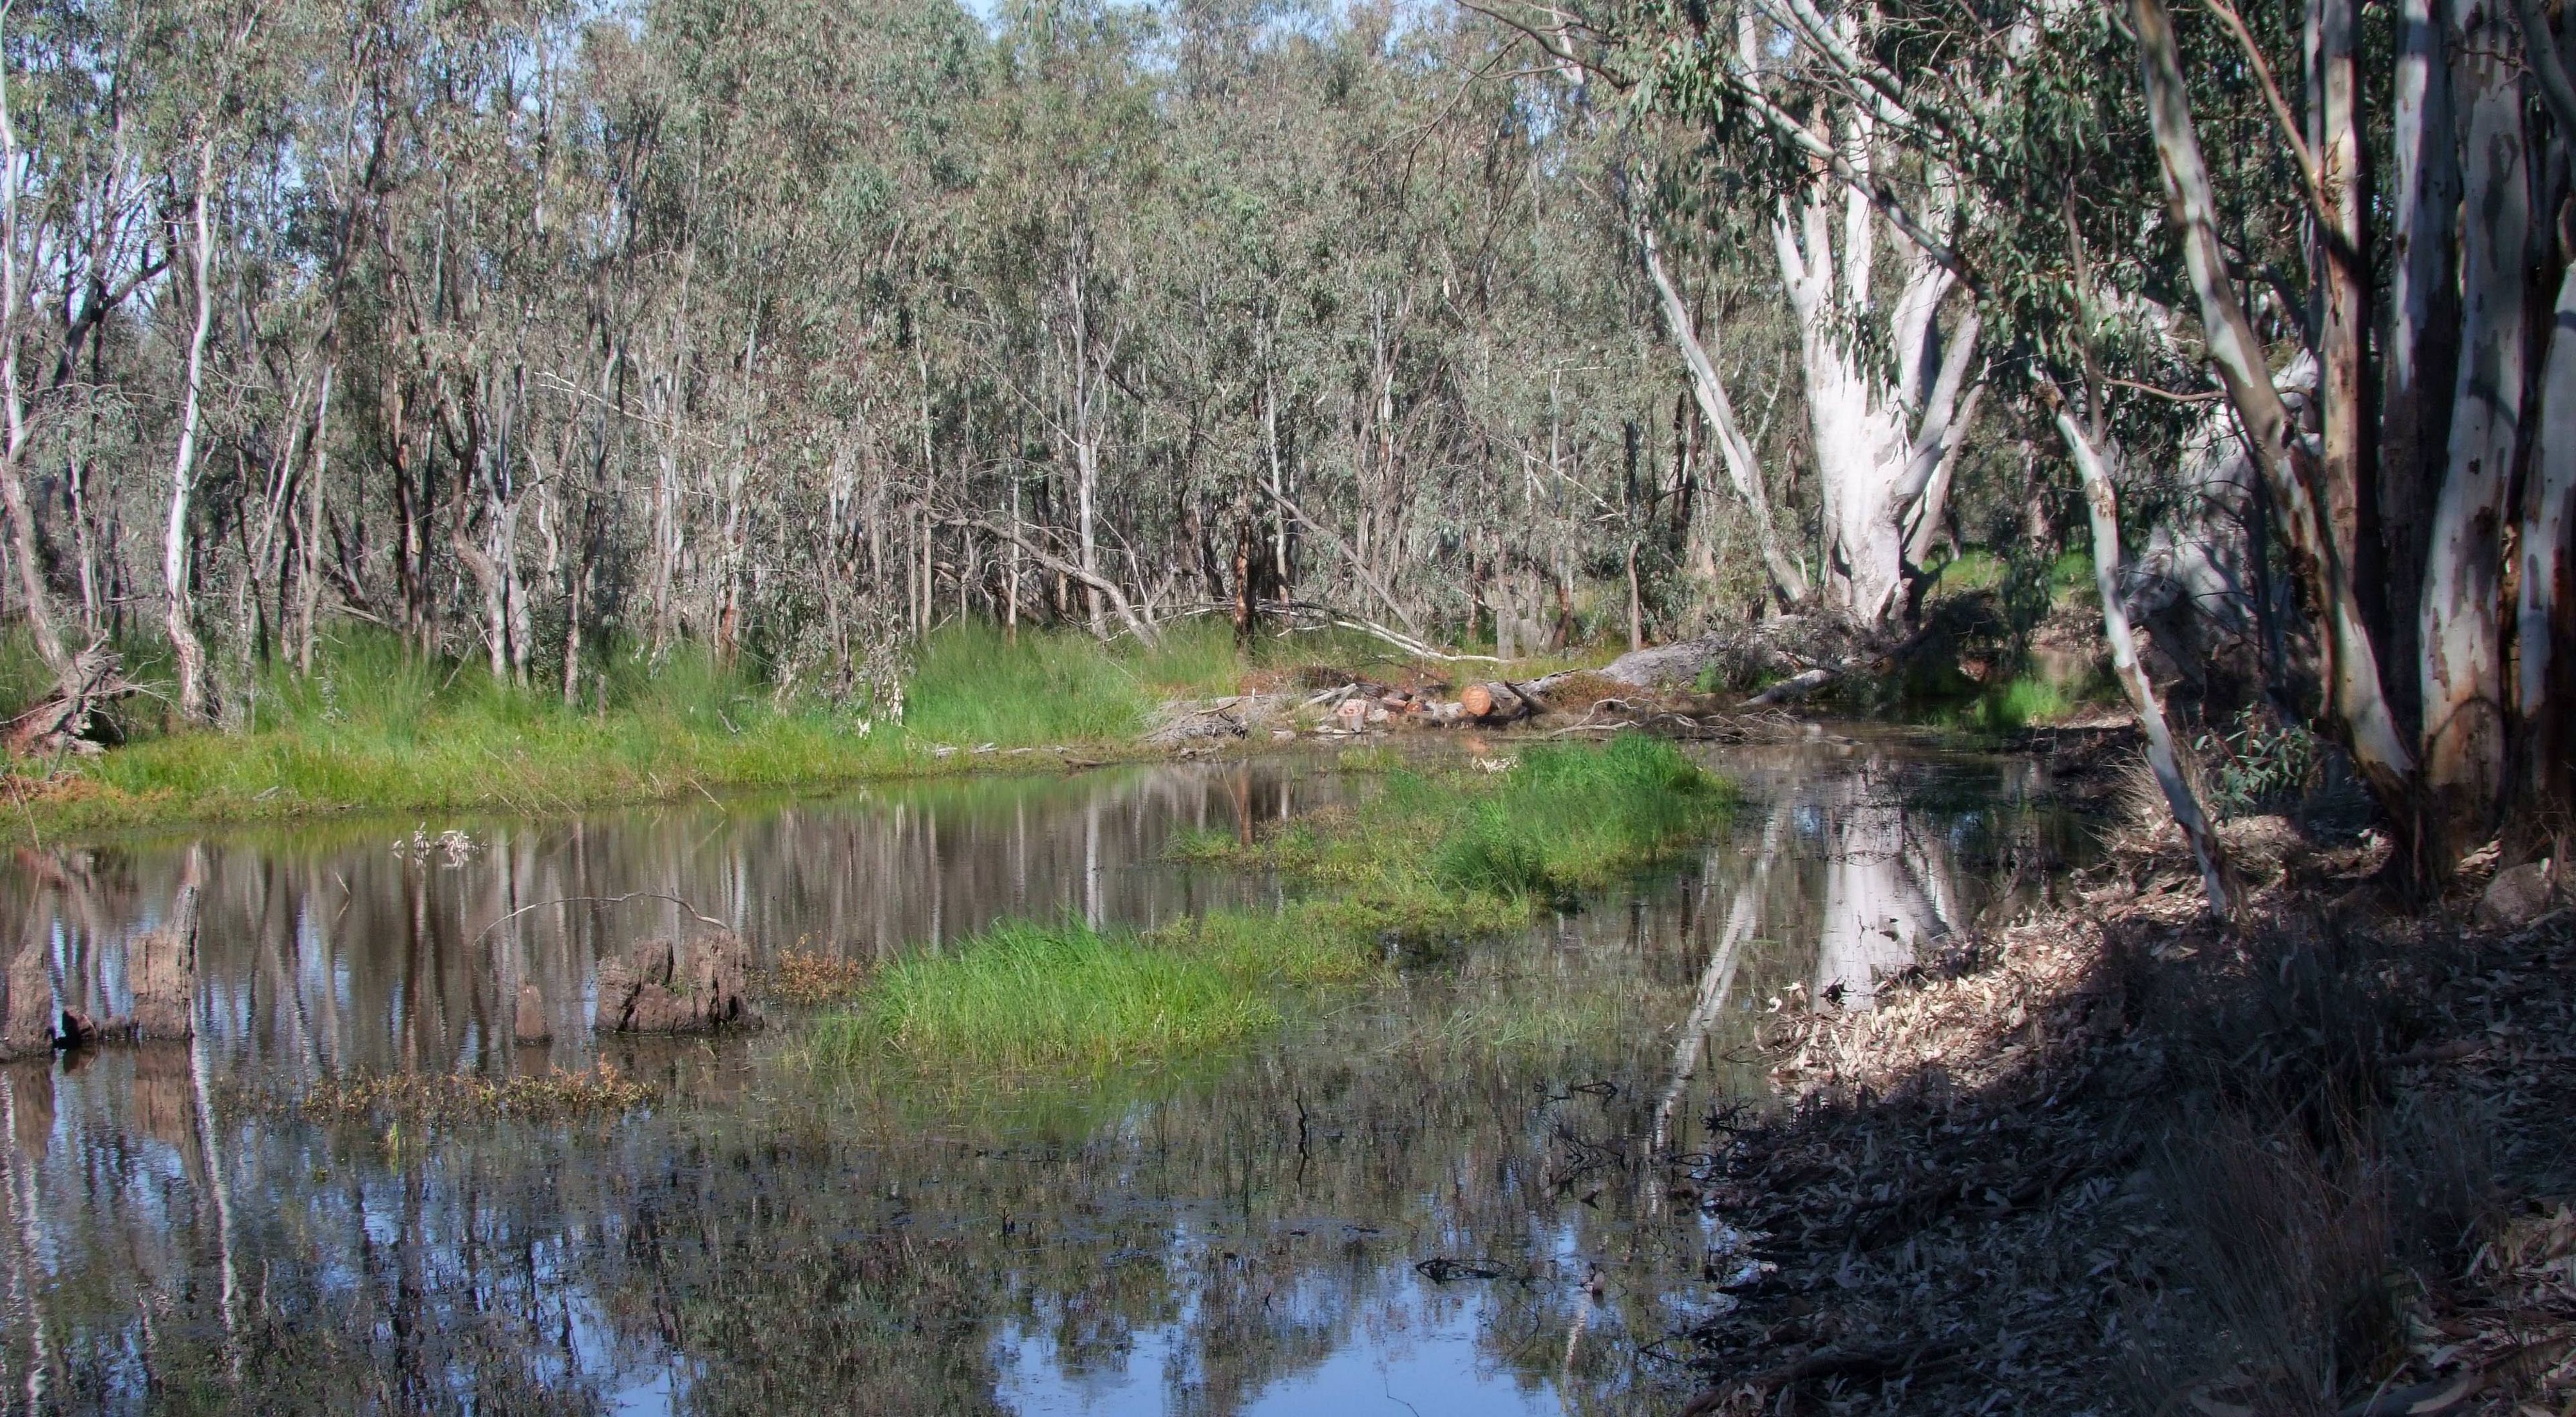 where TNC had a purposeful flooding supported by the Murray-Darling Basin Balanced Water Fund